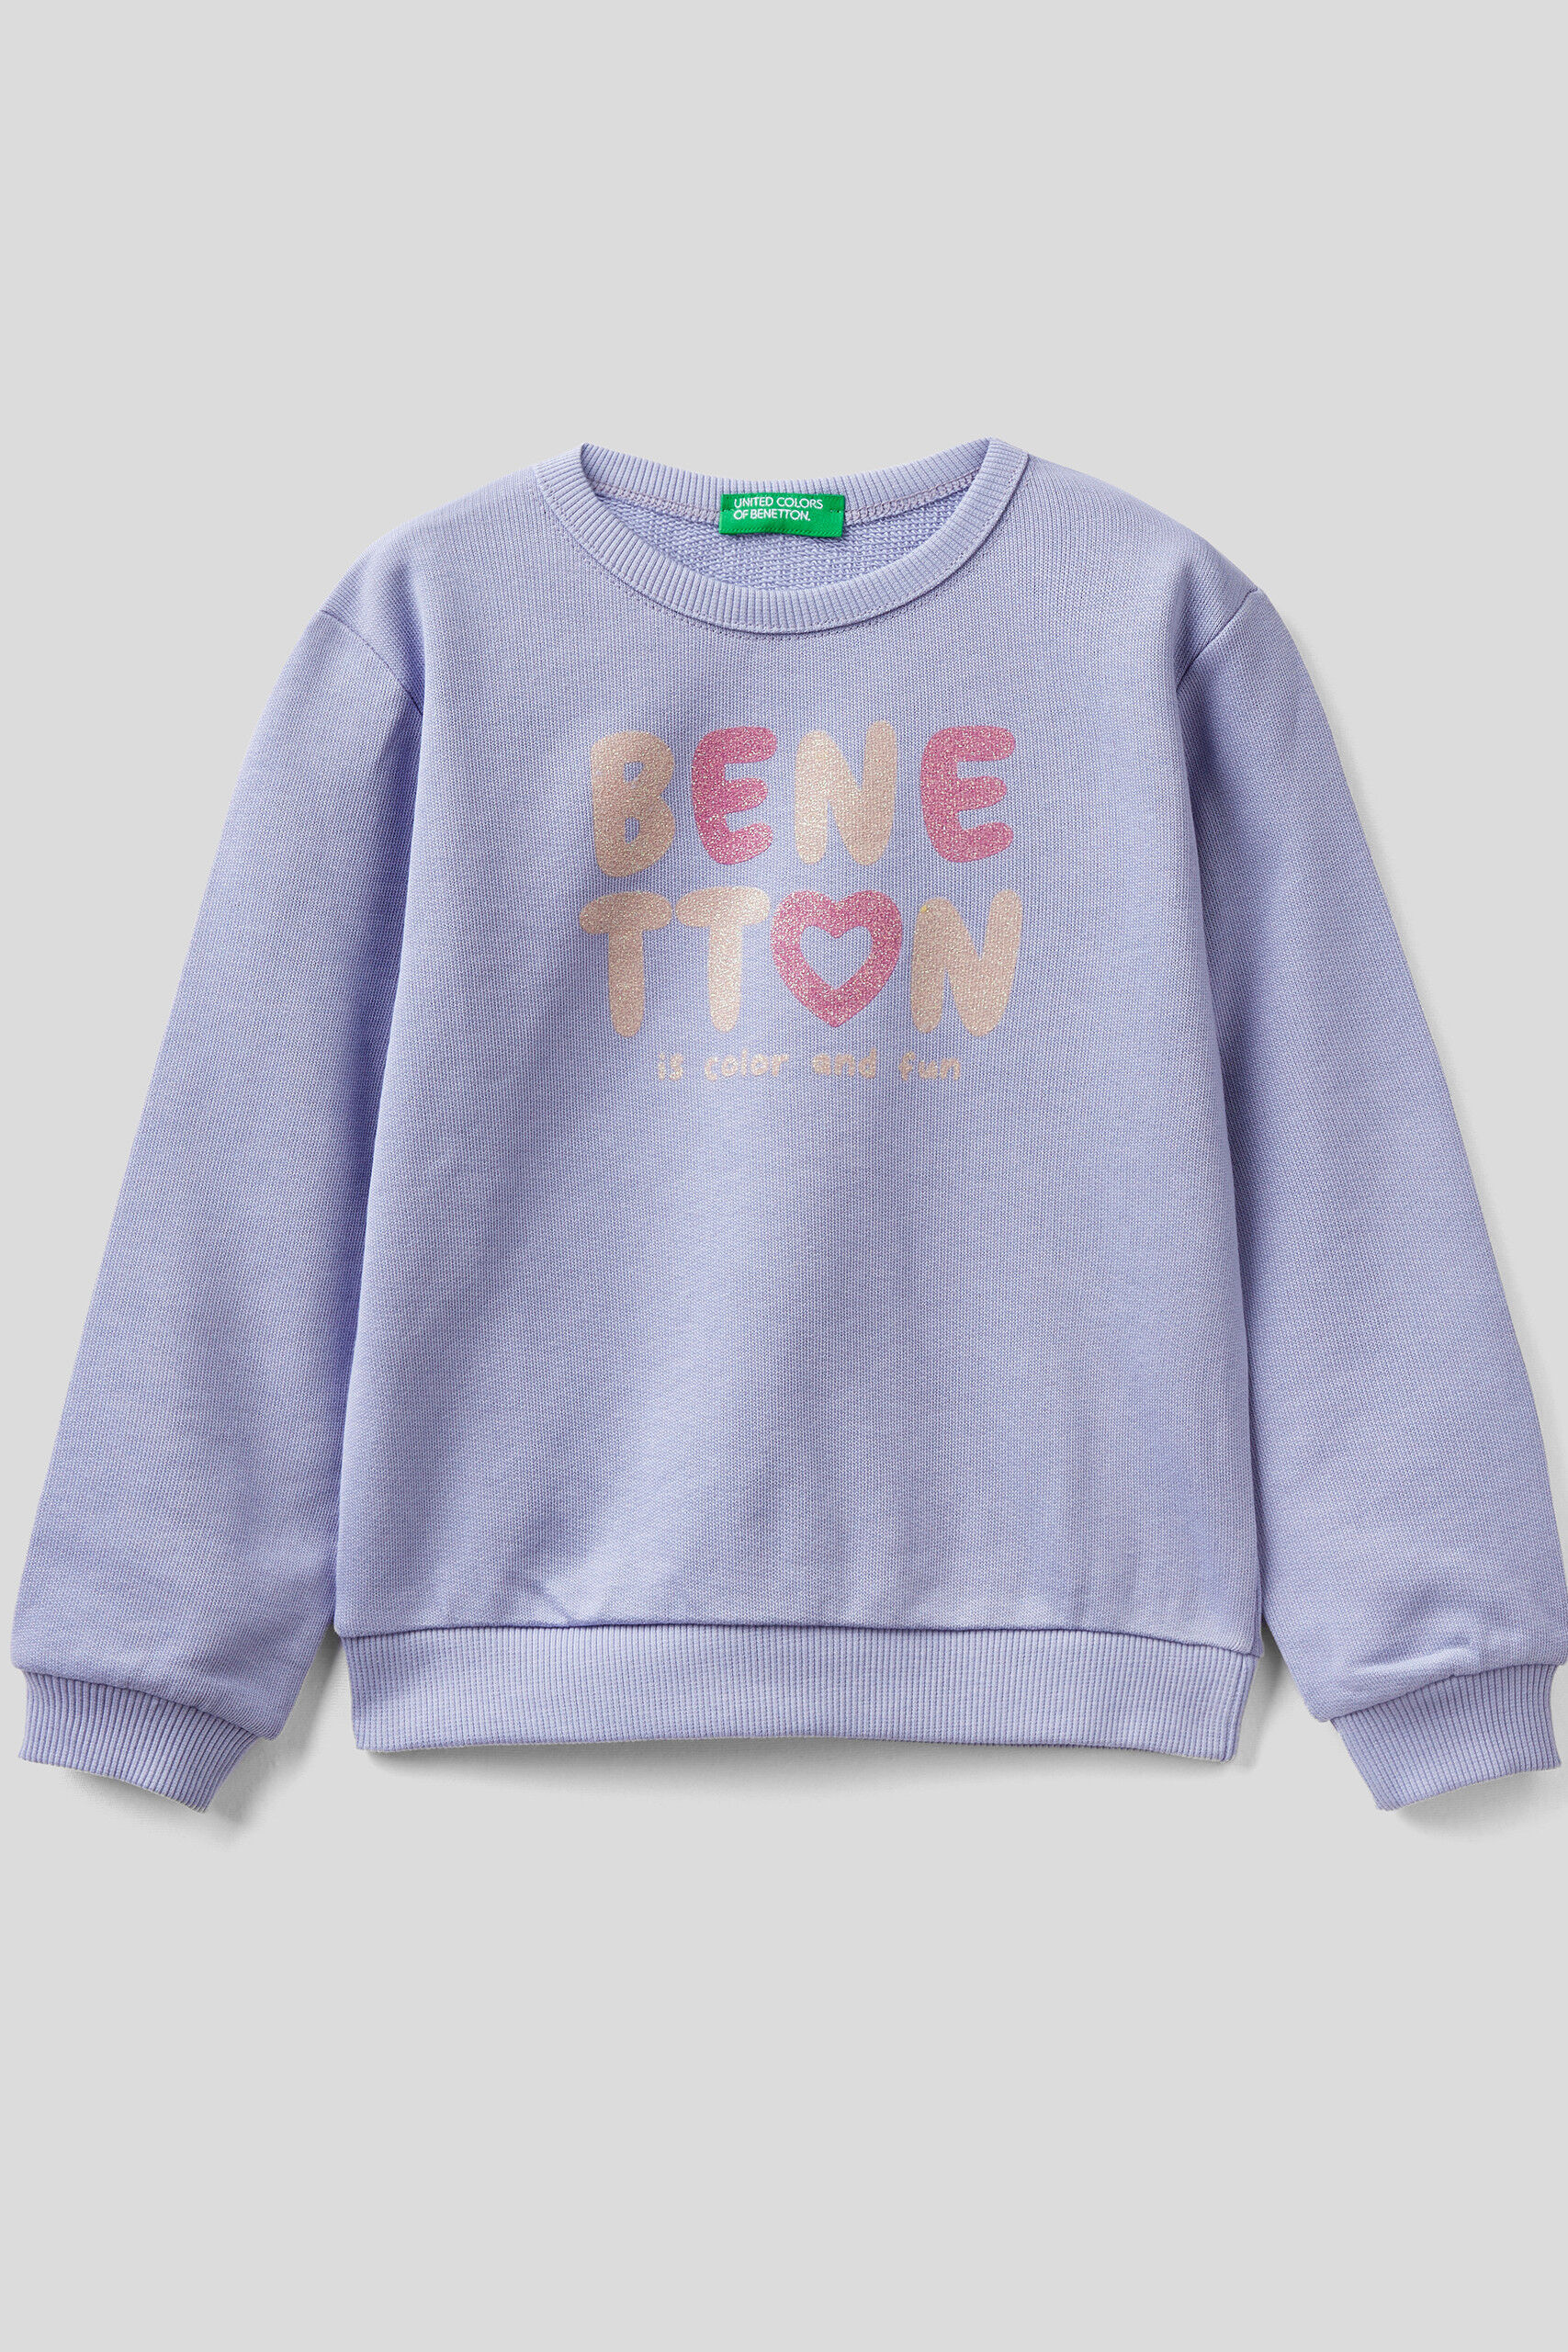 New Collection Kid Girl's Apparel | Benetton